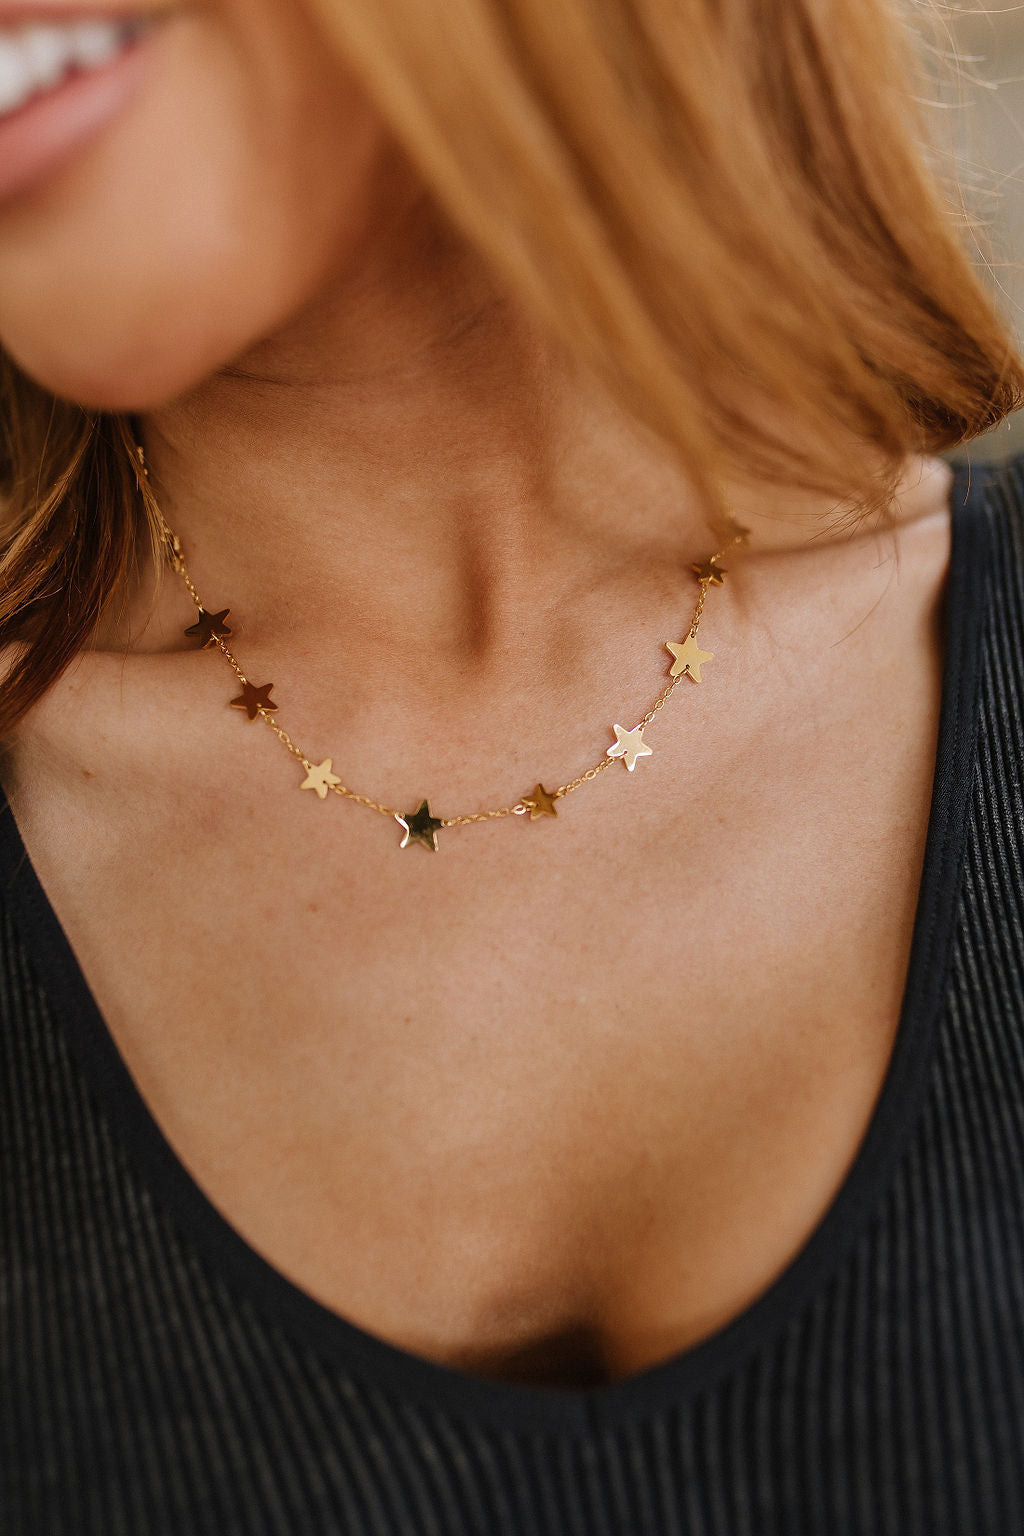 Necklace Full of Stars